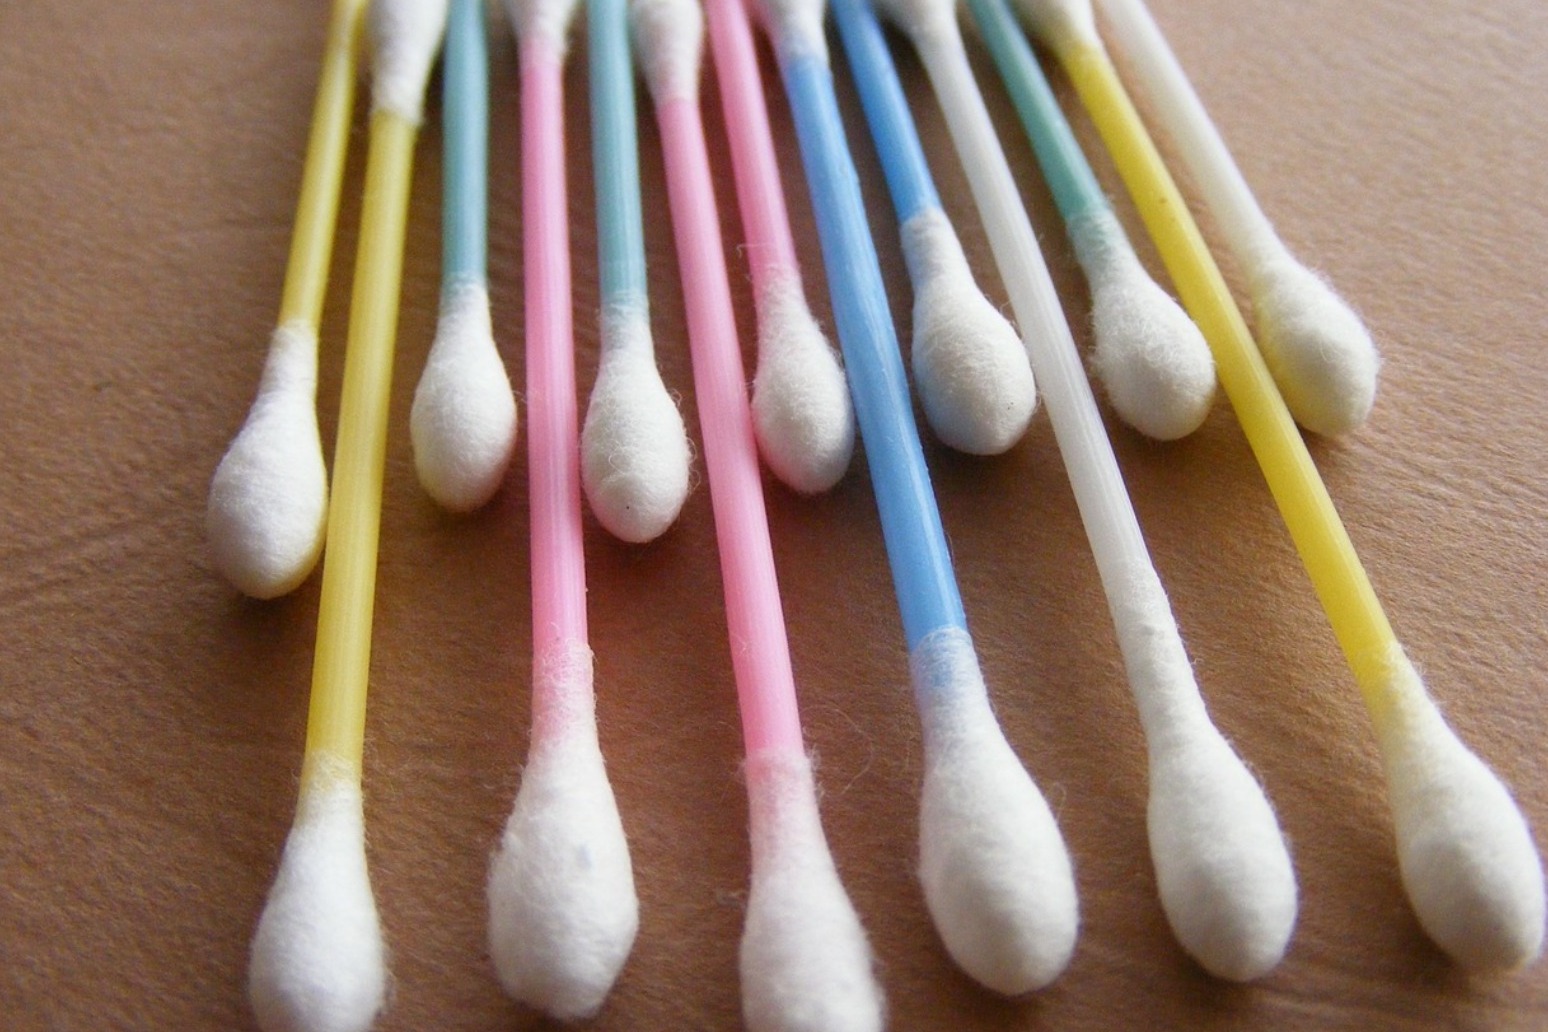 SCOTLAND BECOMES FIRST PART OF UK TO BAN PLASTIC COTTON BUDS 